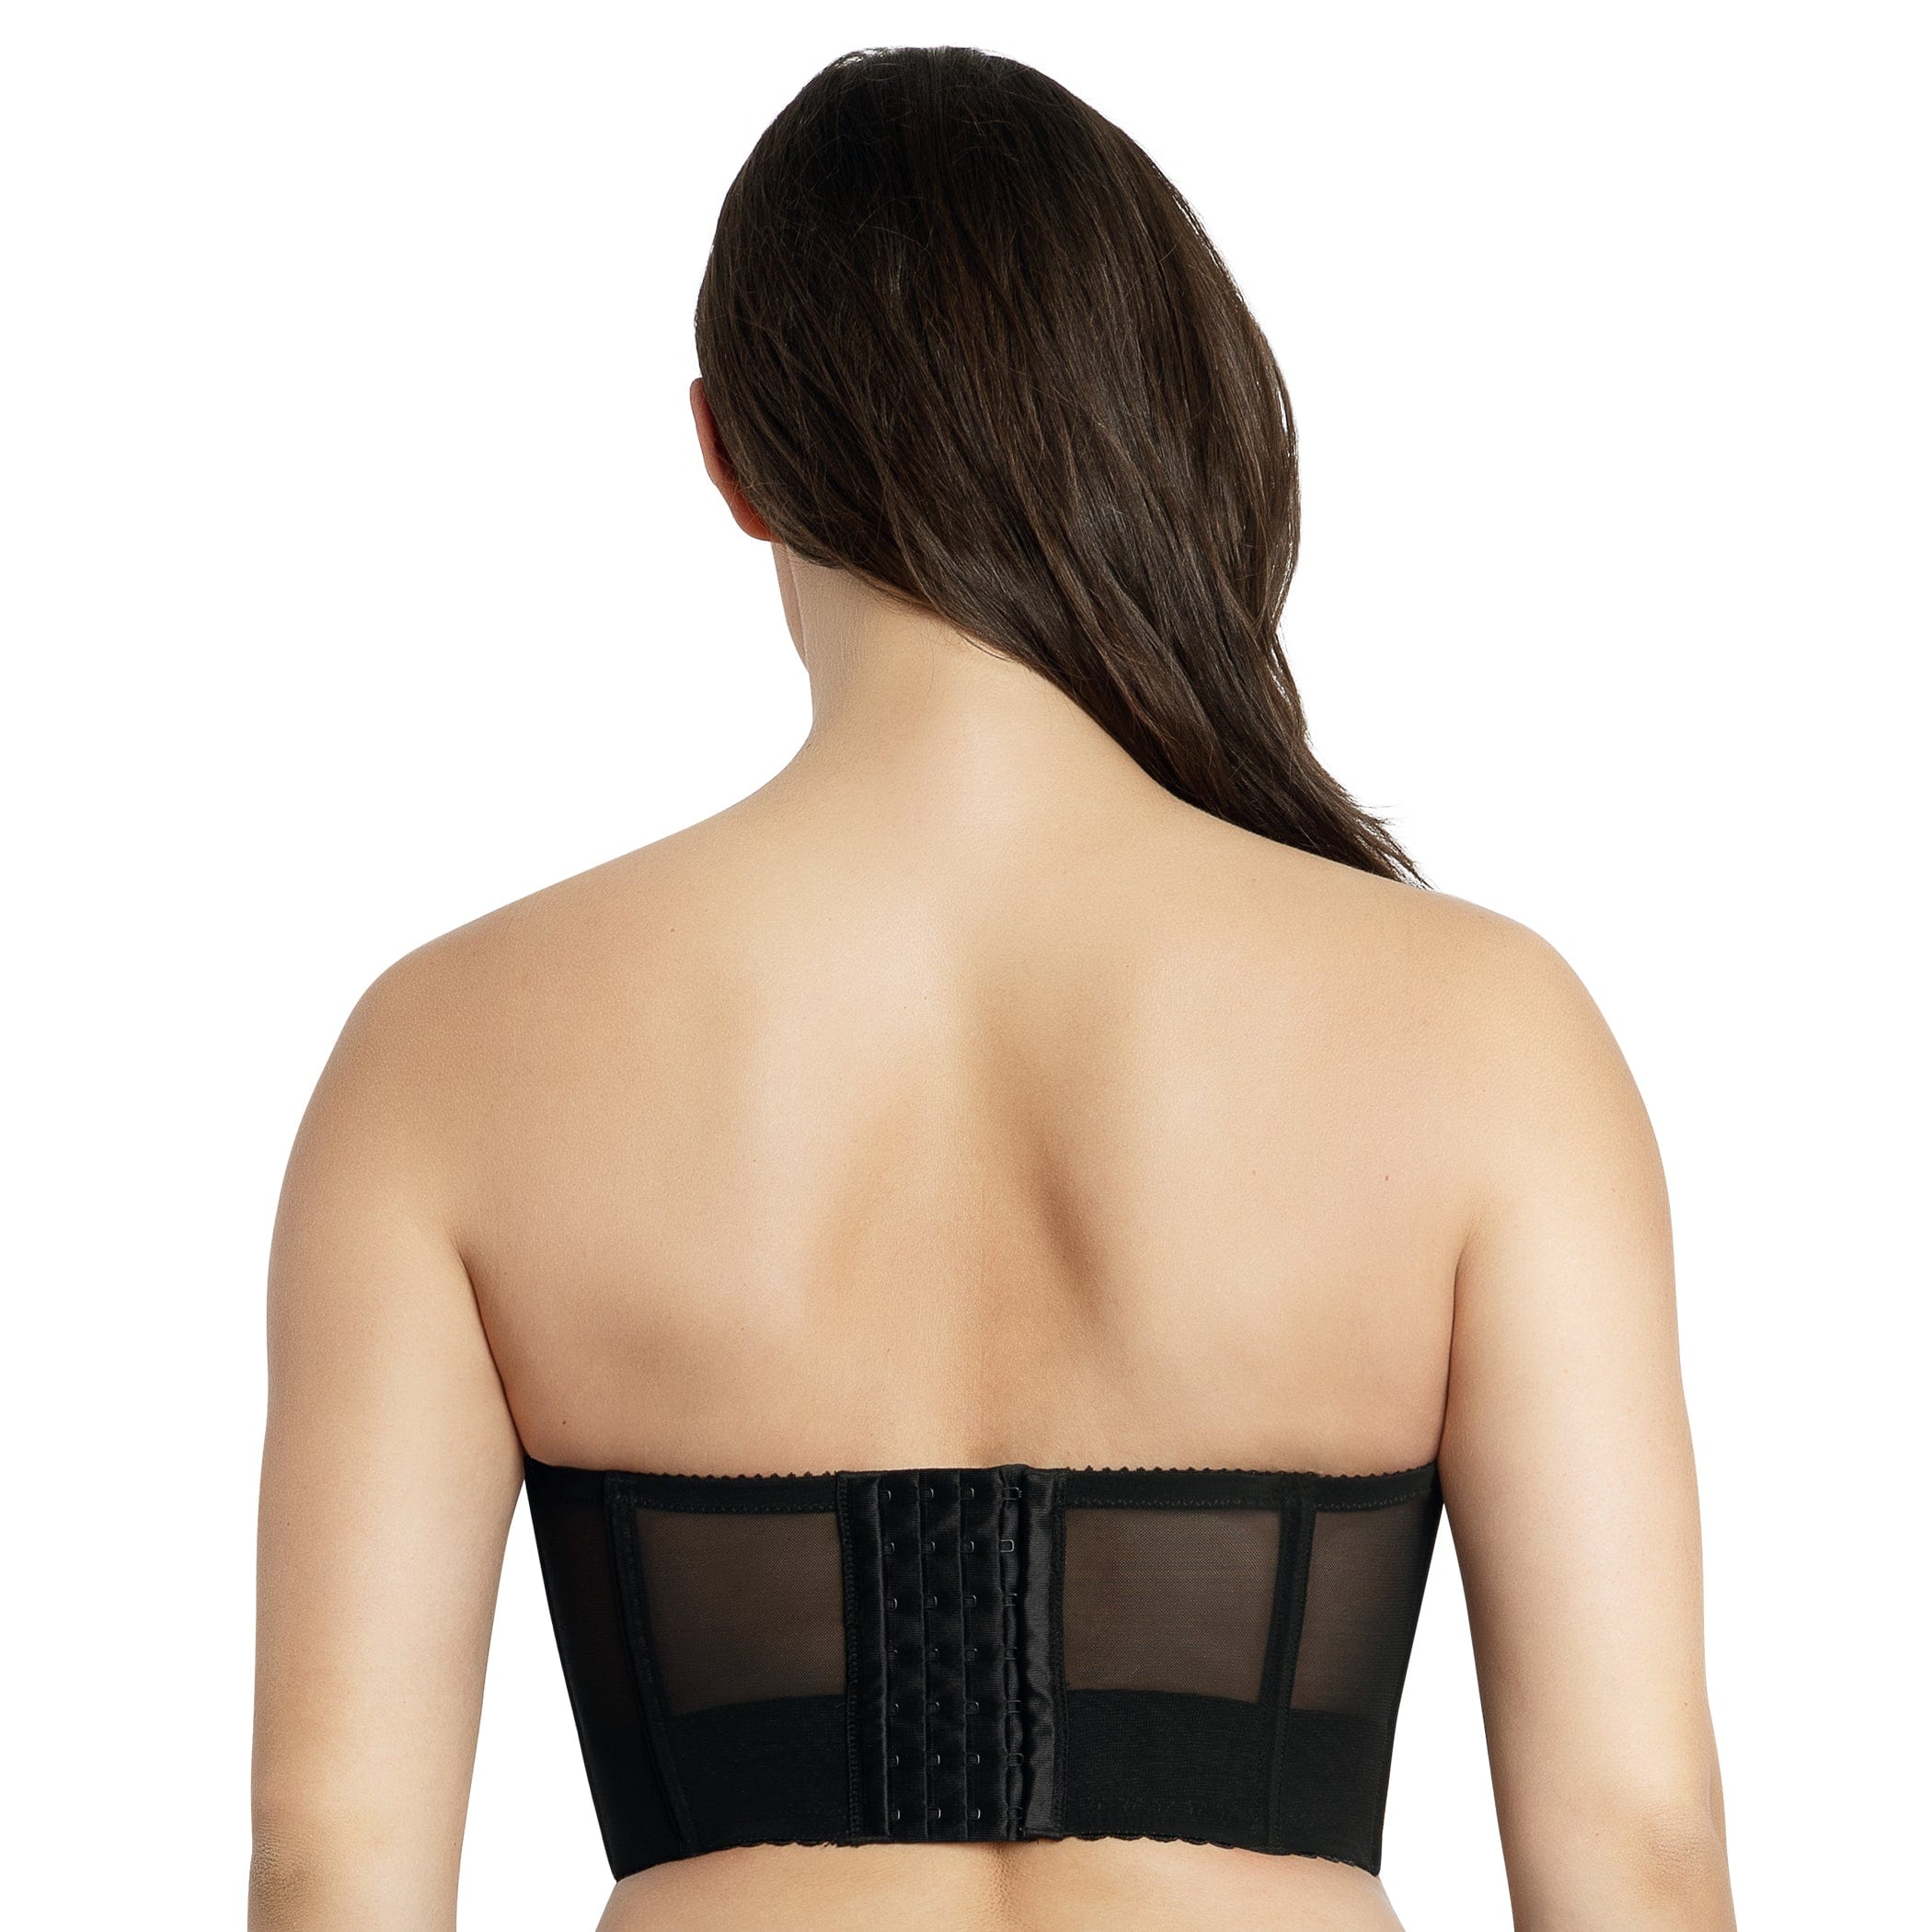 Masitt Coty Adhesive Bra Strapless Bra Backless Bra Invisible Bra with 2  Piece Design Perfect for Evening Dresses, Swimsuits Black/Beige at   Women's Clothing store